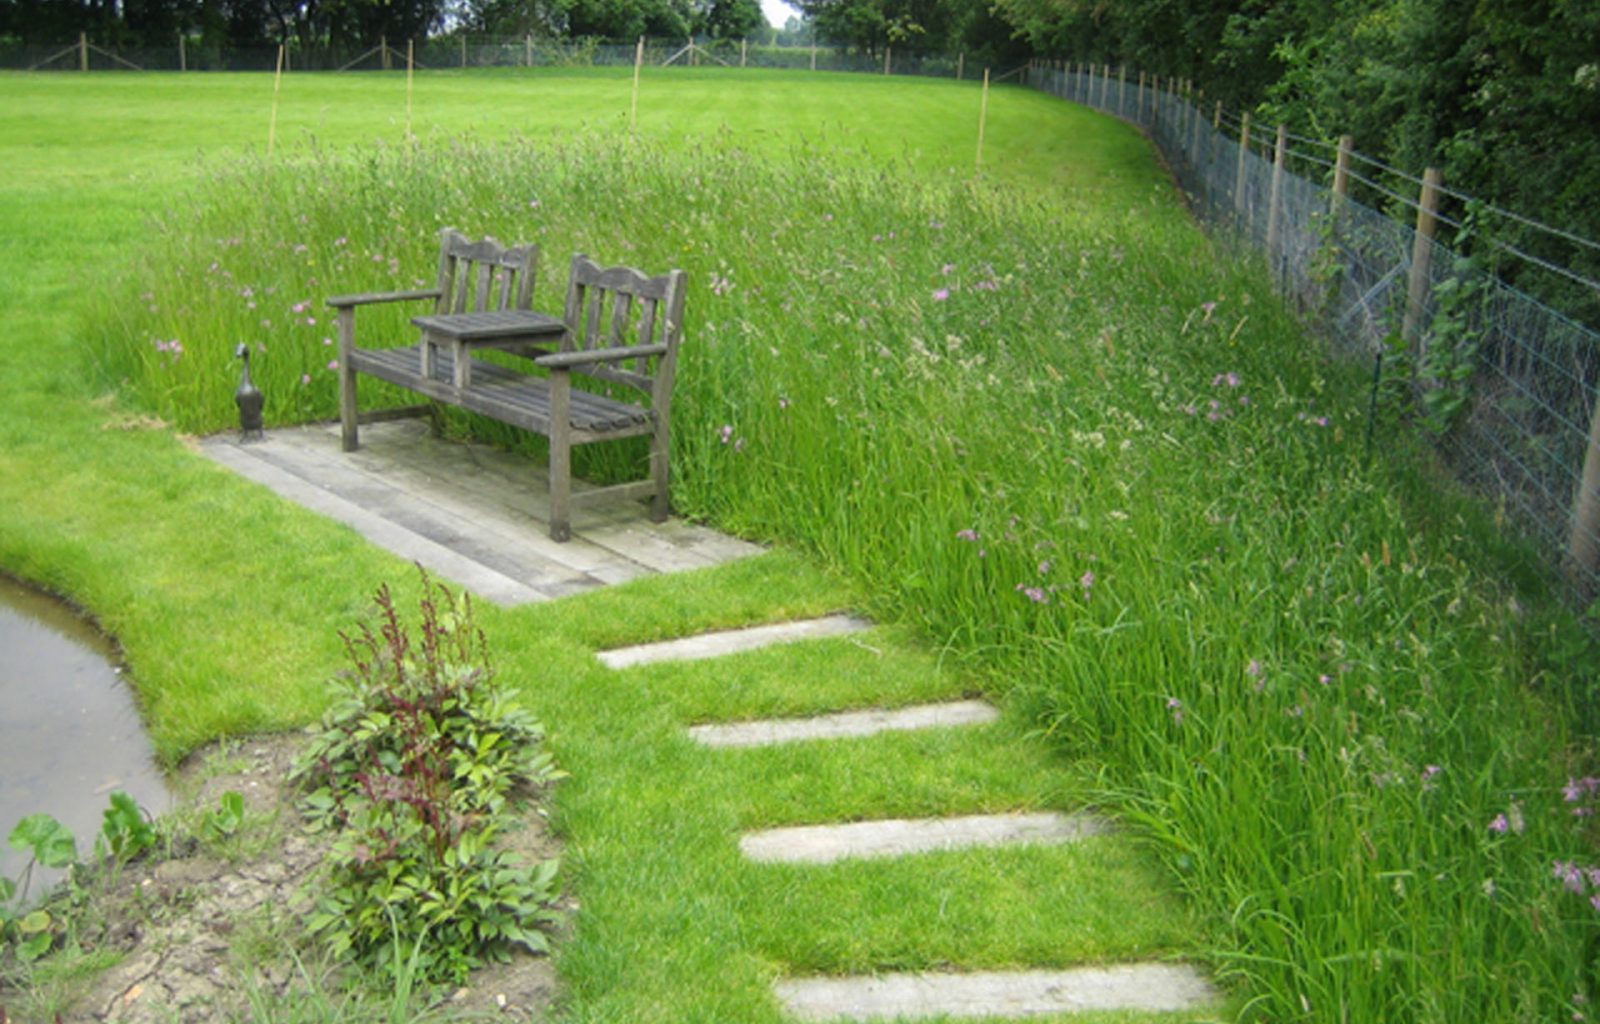 A fenced paddock area containing a natural pond, wooden bench and wildflower turf area